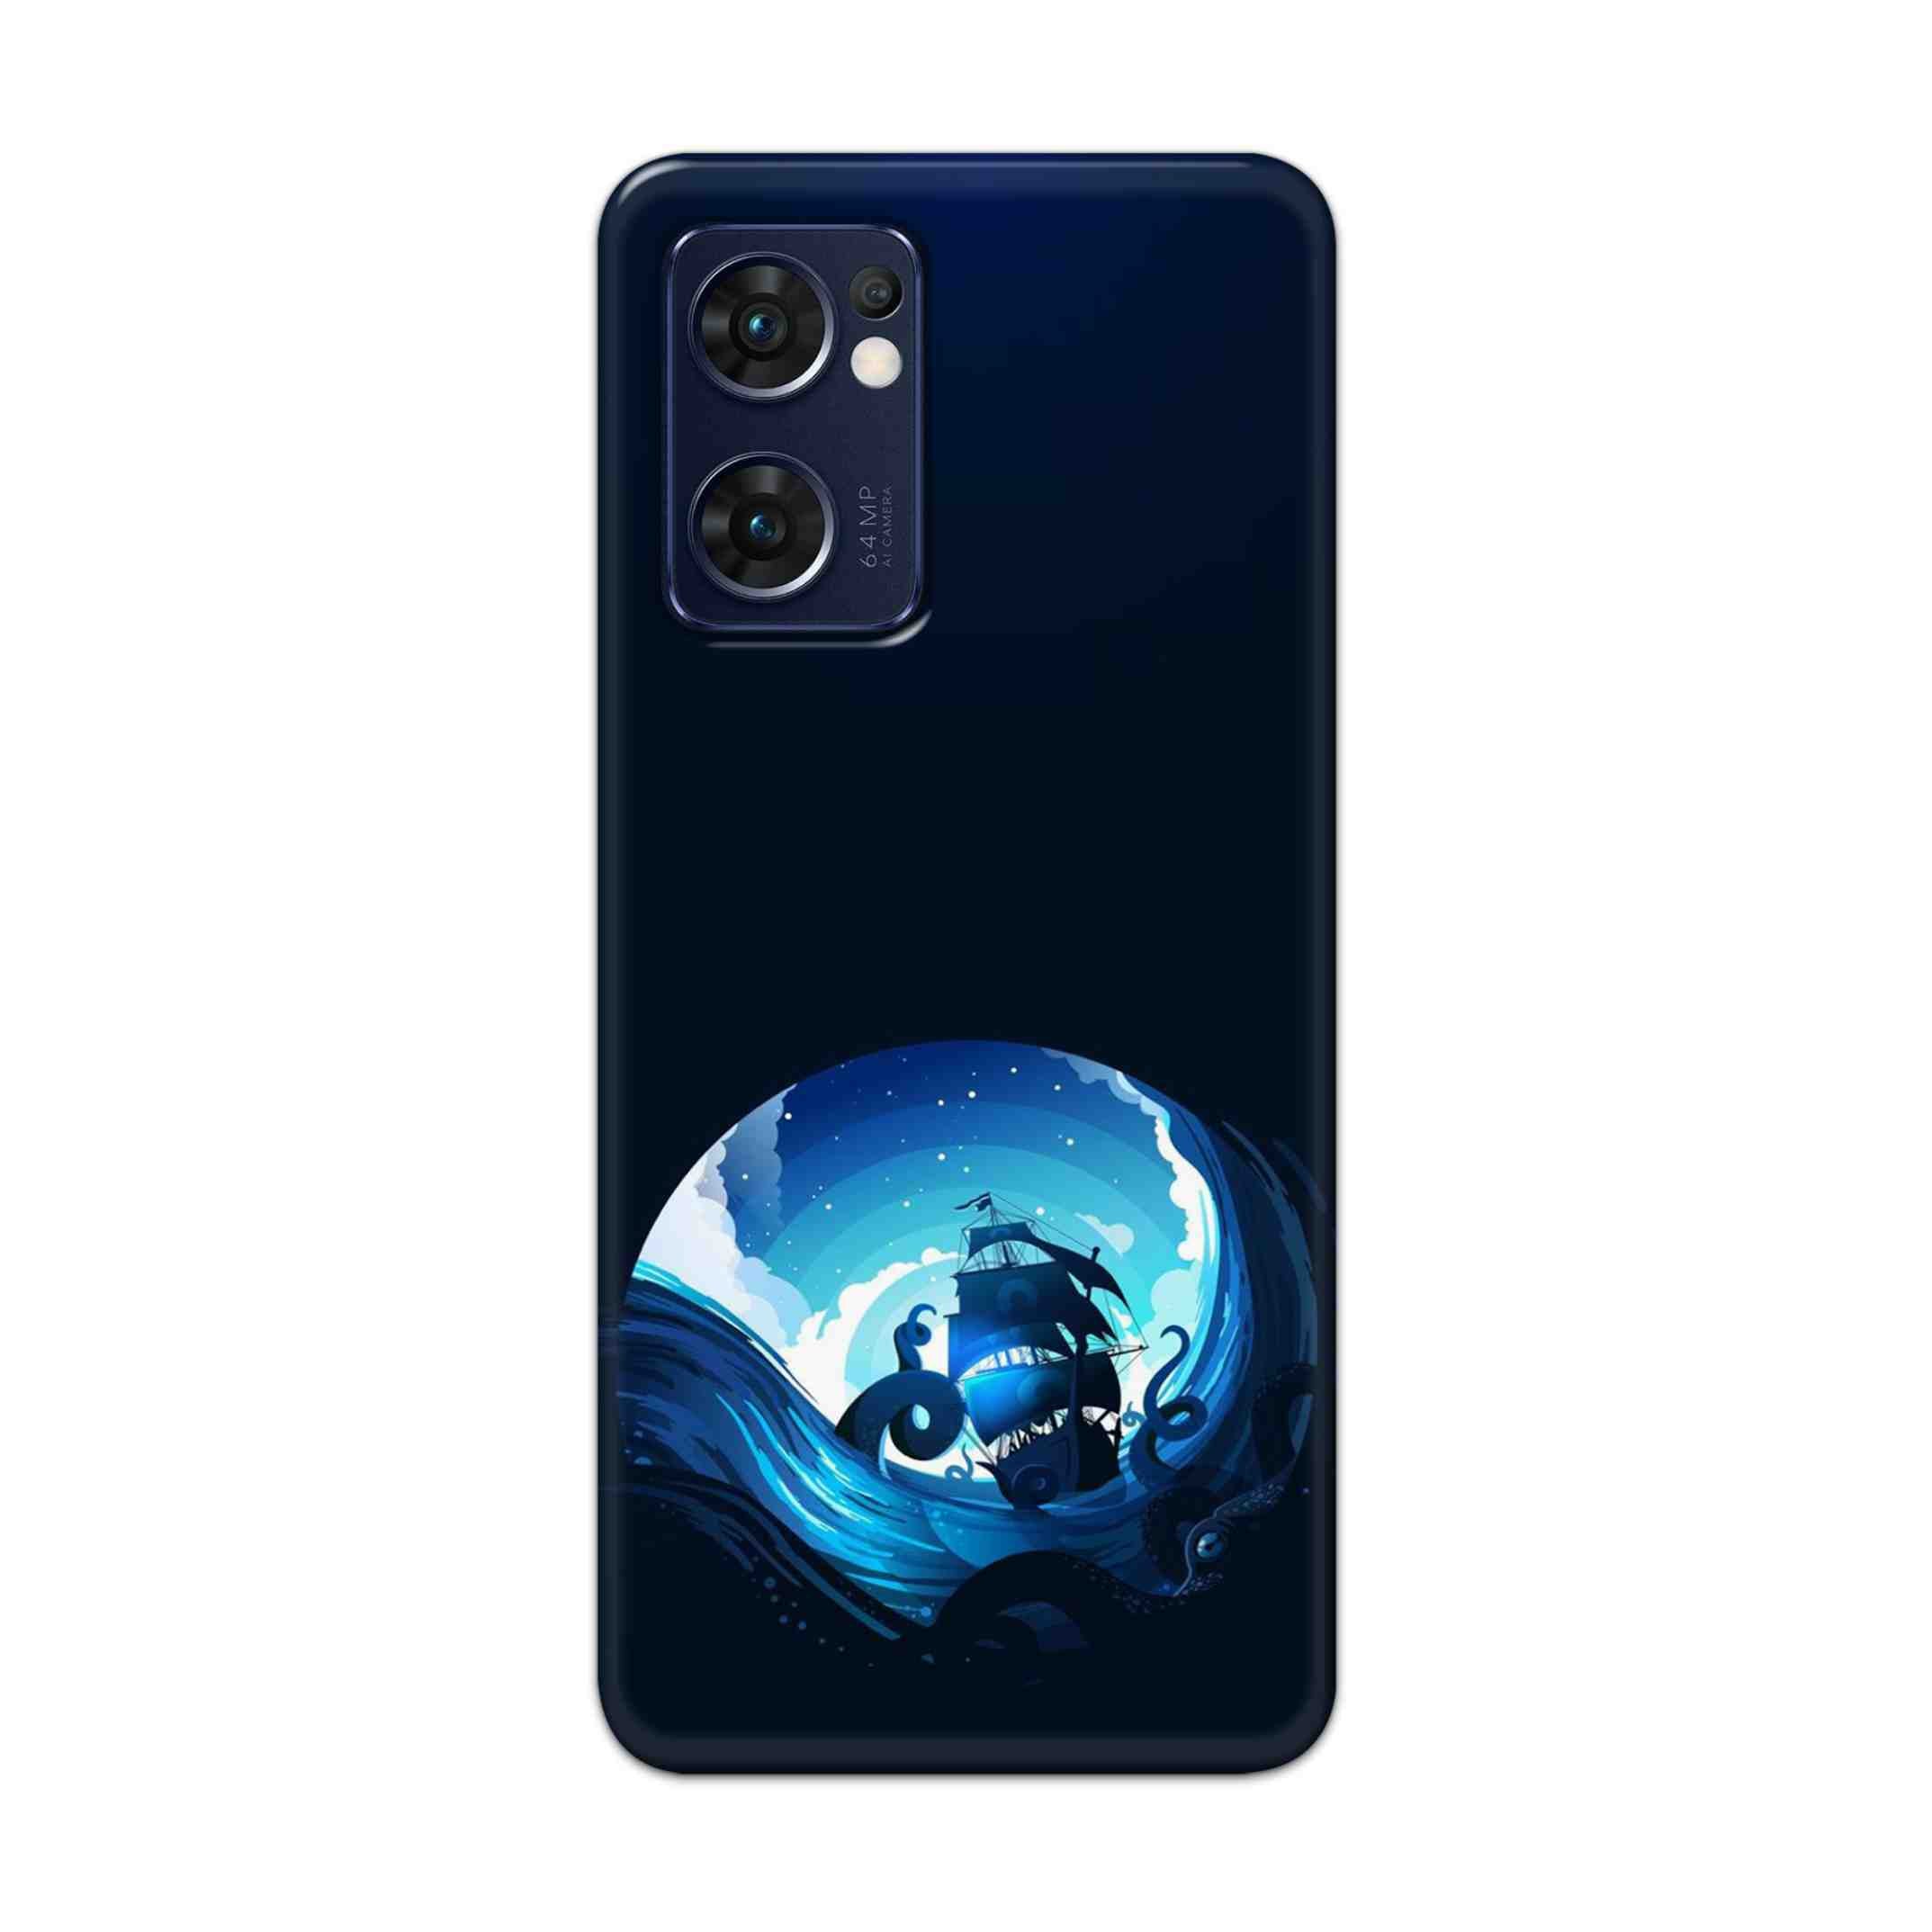 Buy Blue Sea Ship Hard Back Mobile Phone Case Cover For Reno 7 5G Online